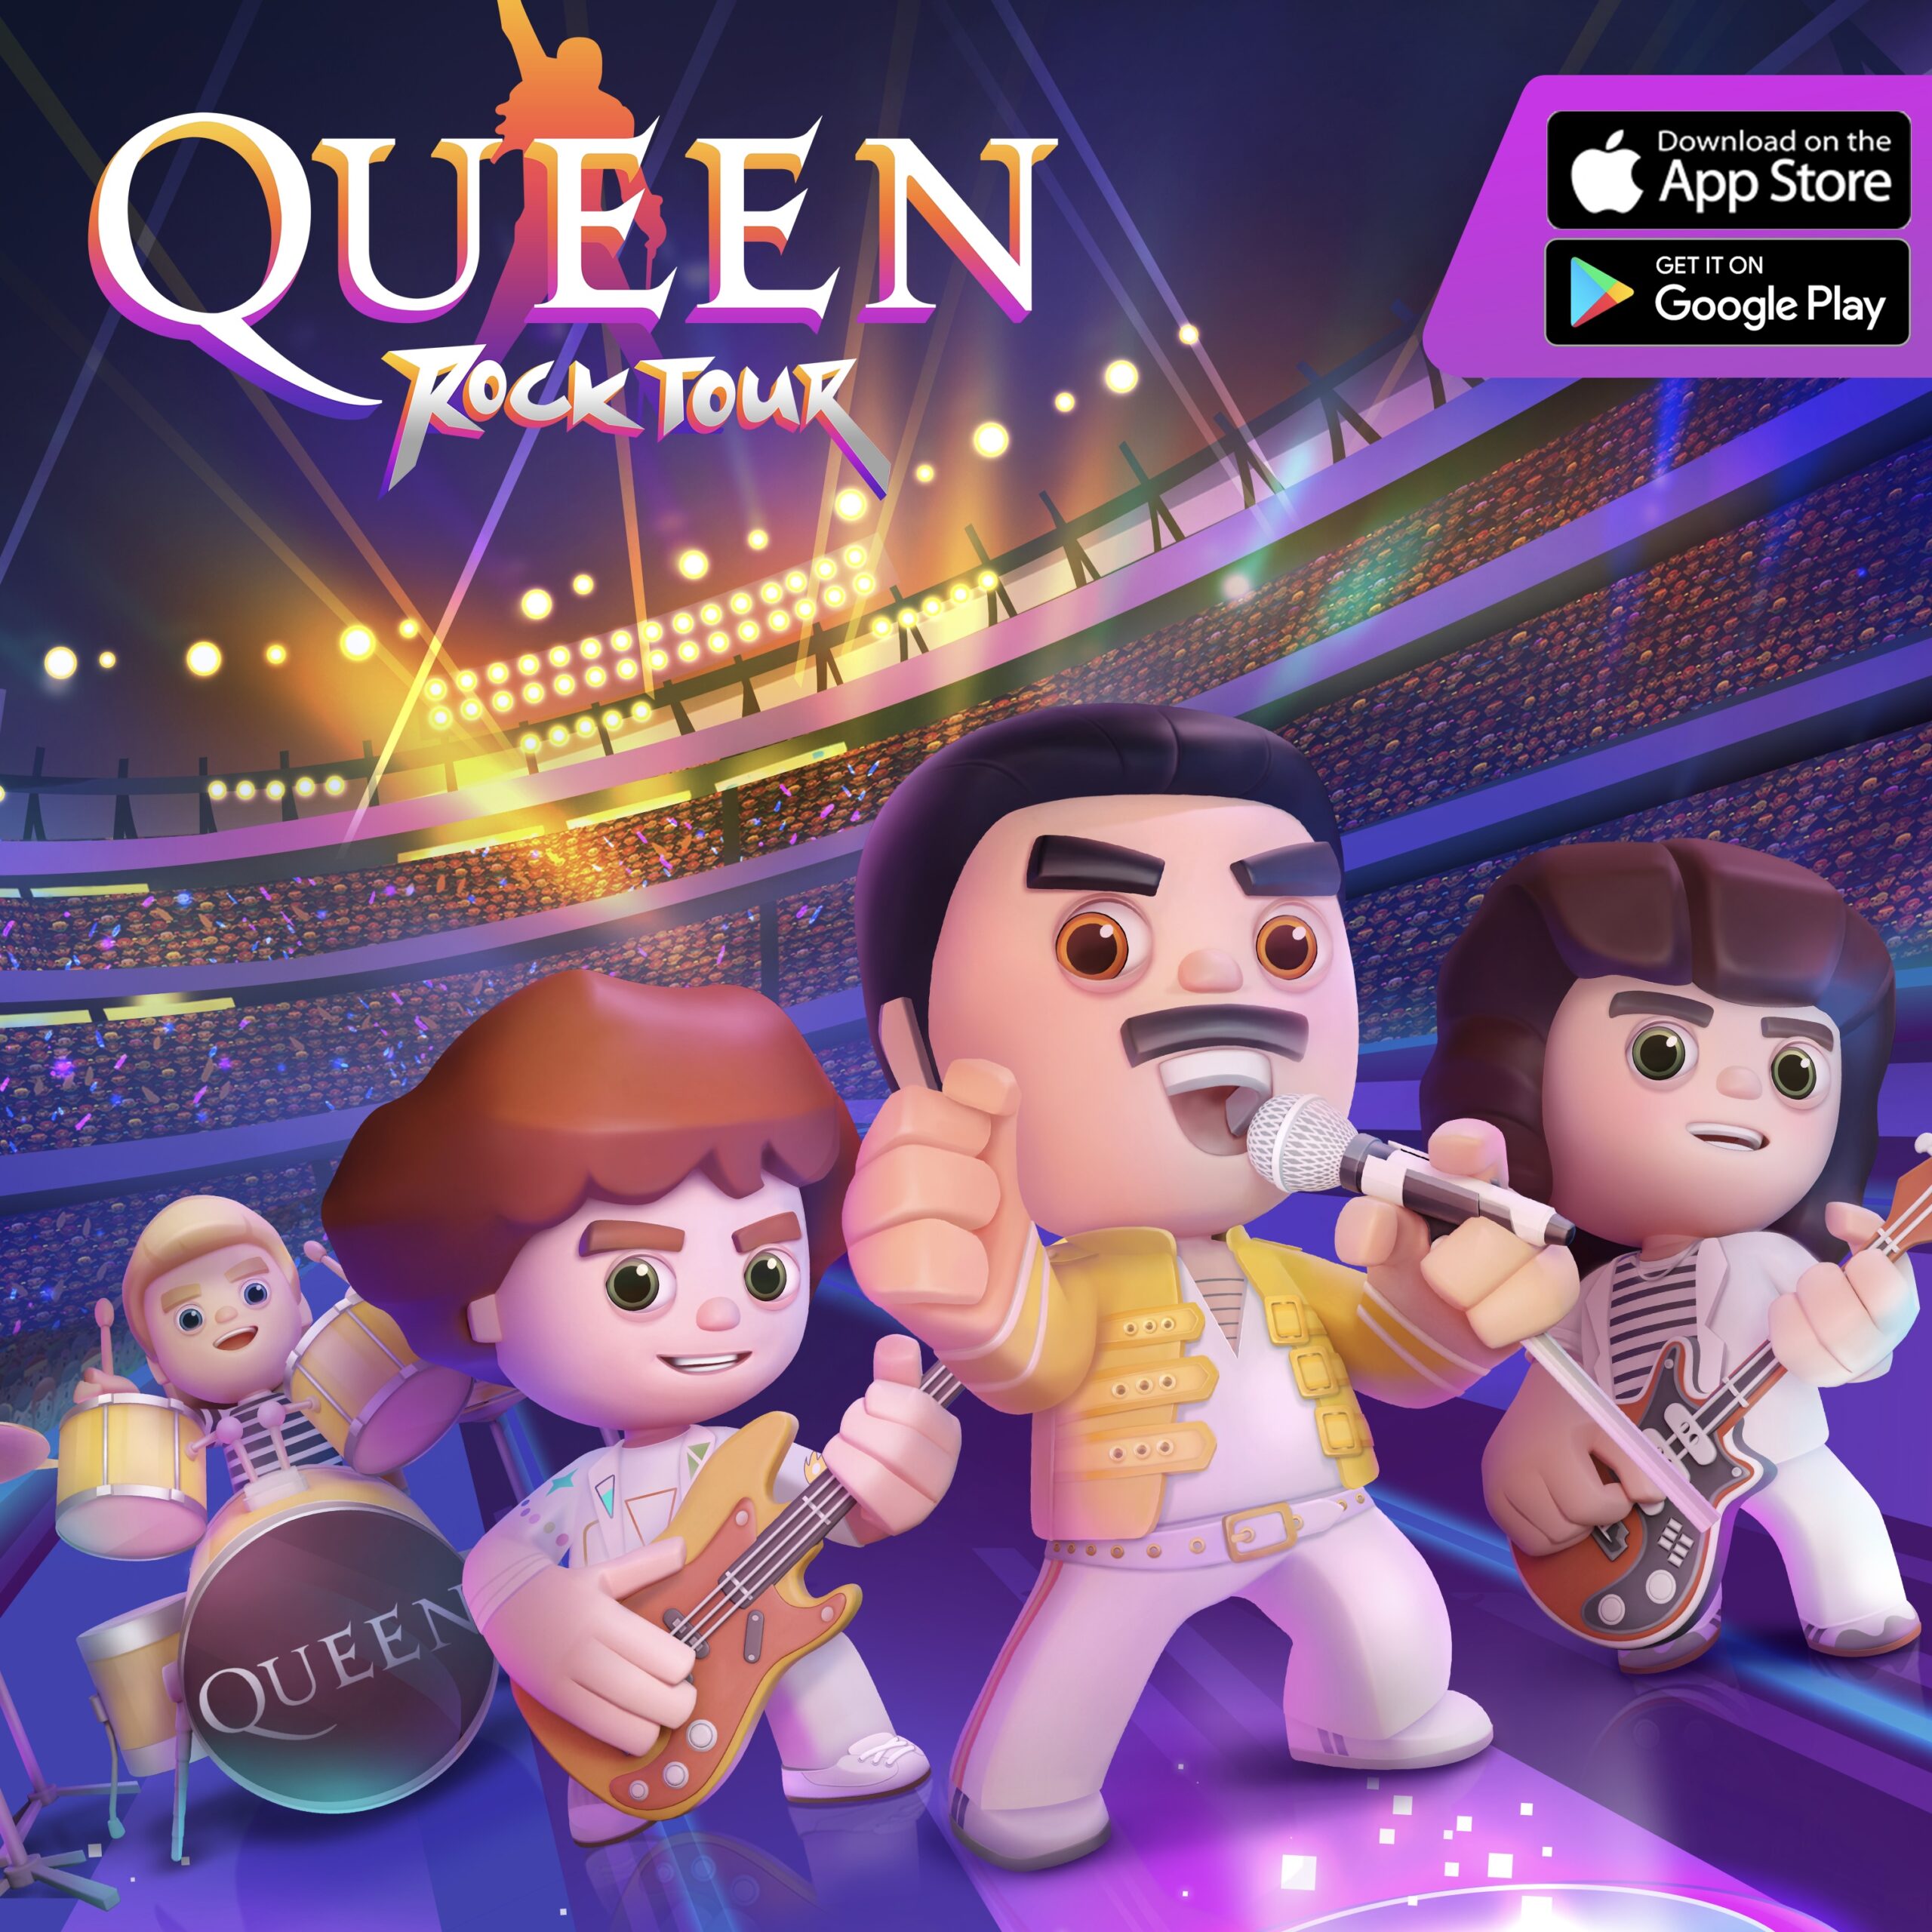 Queen Rock Tour poster by James Murtagh-Hopkins of Universal Music Group for 360 Magazine